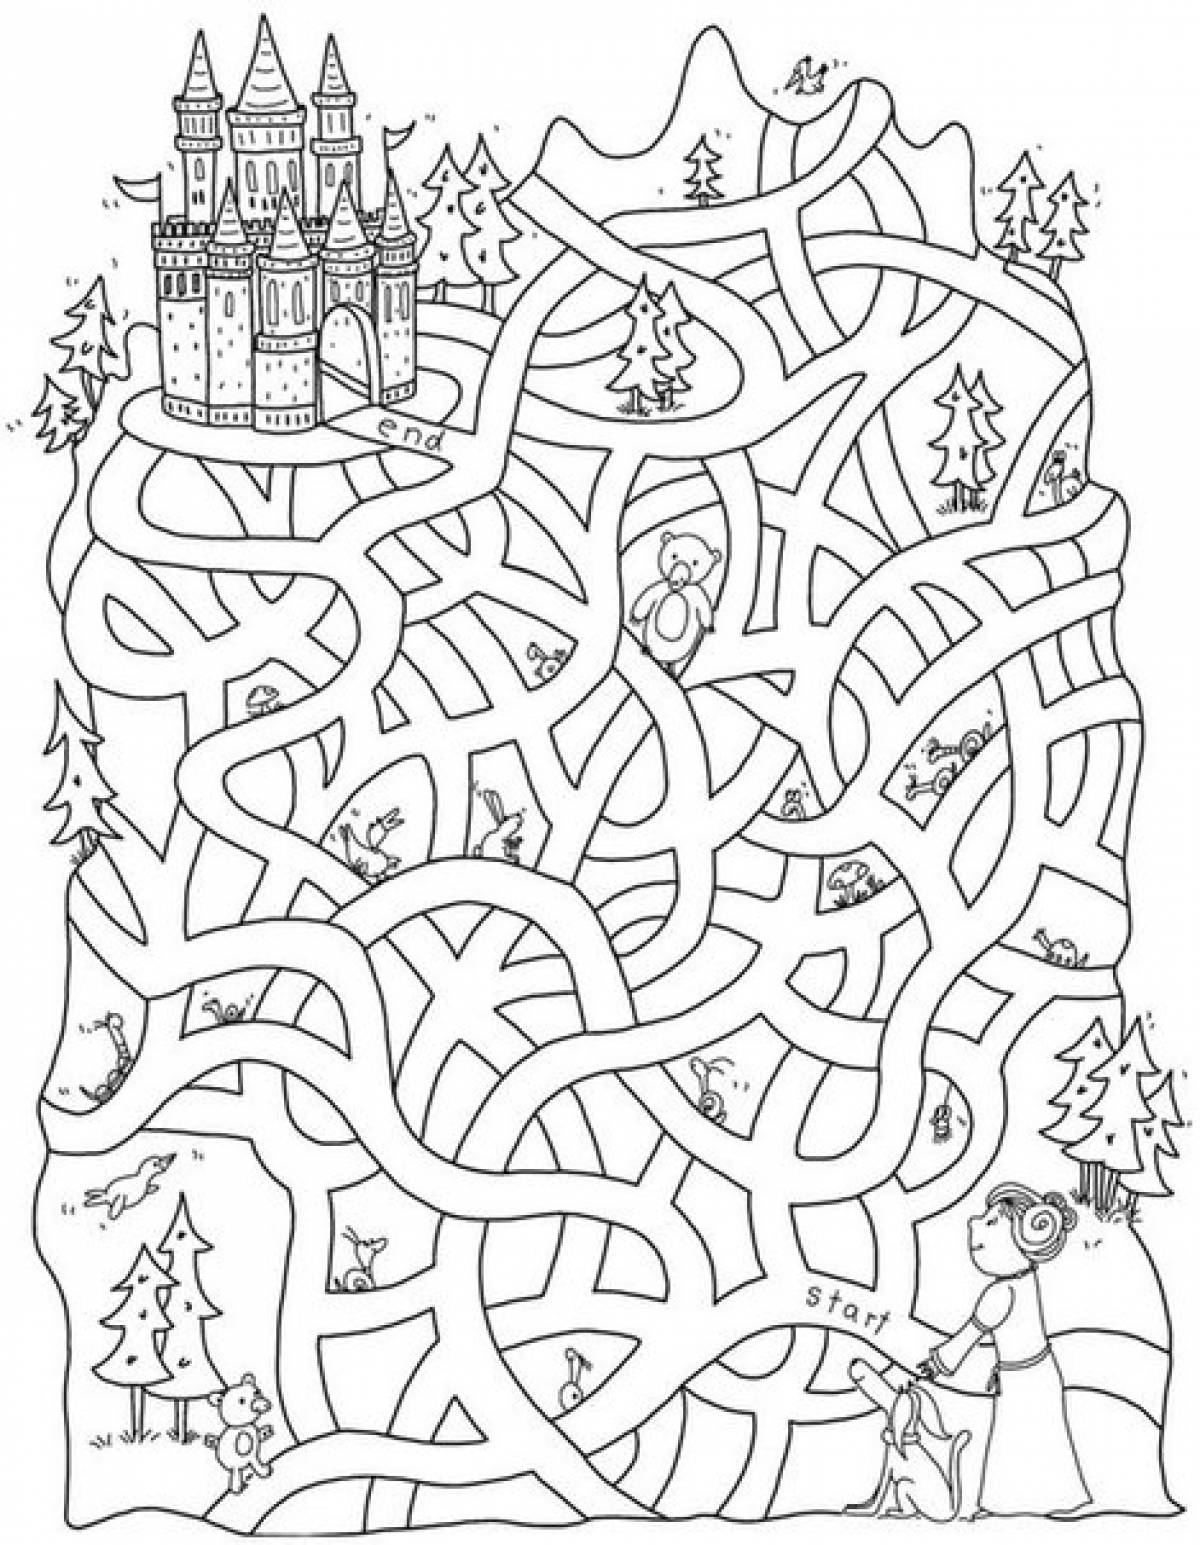 Labyrinth to the castle